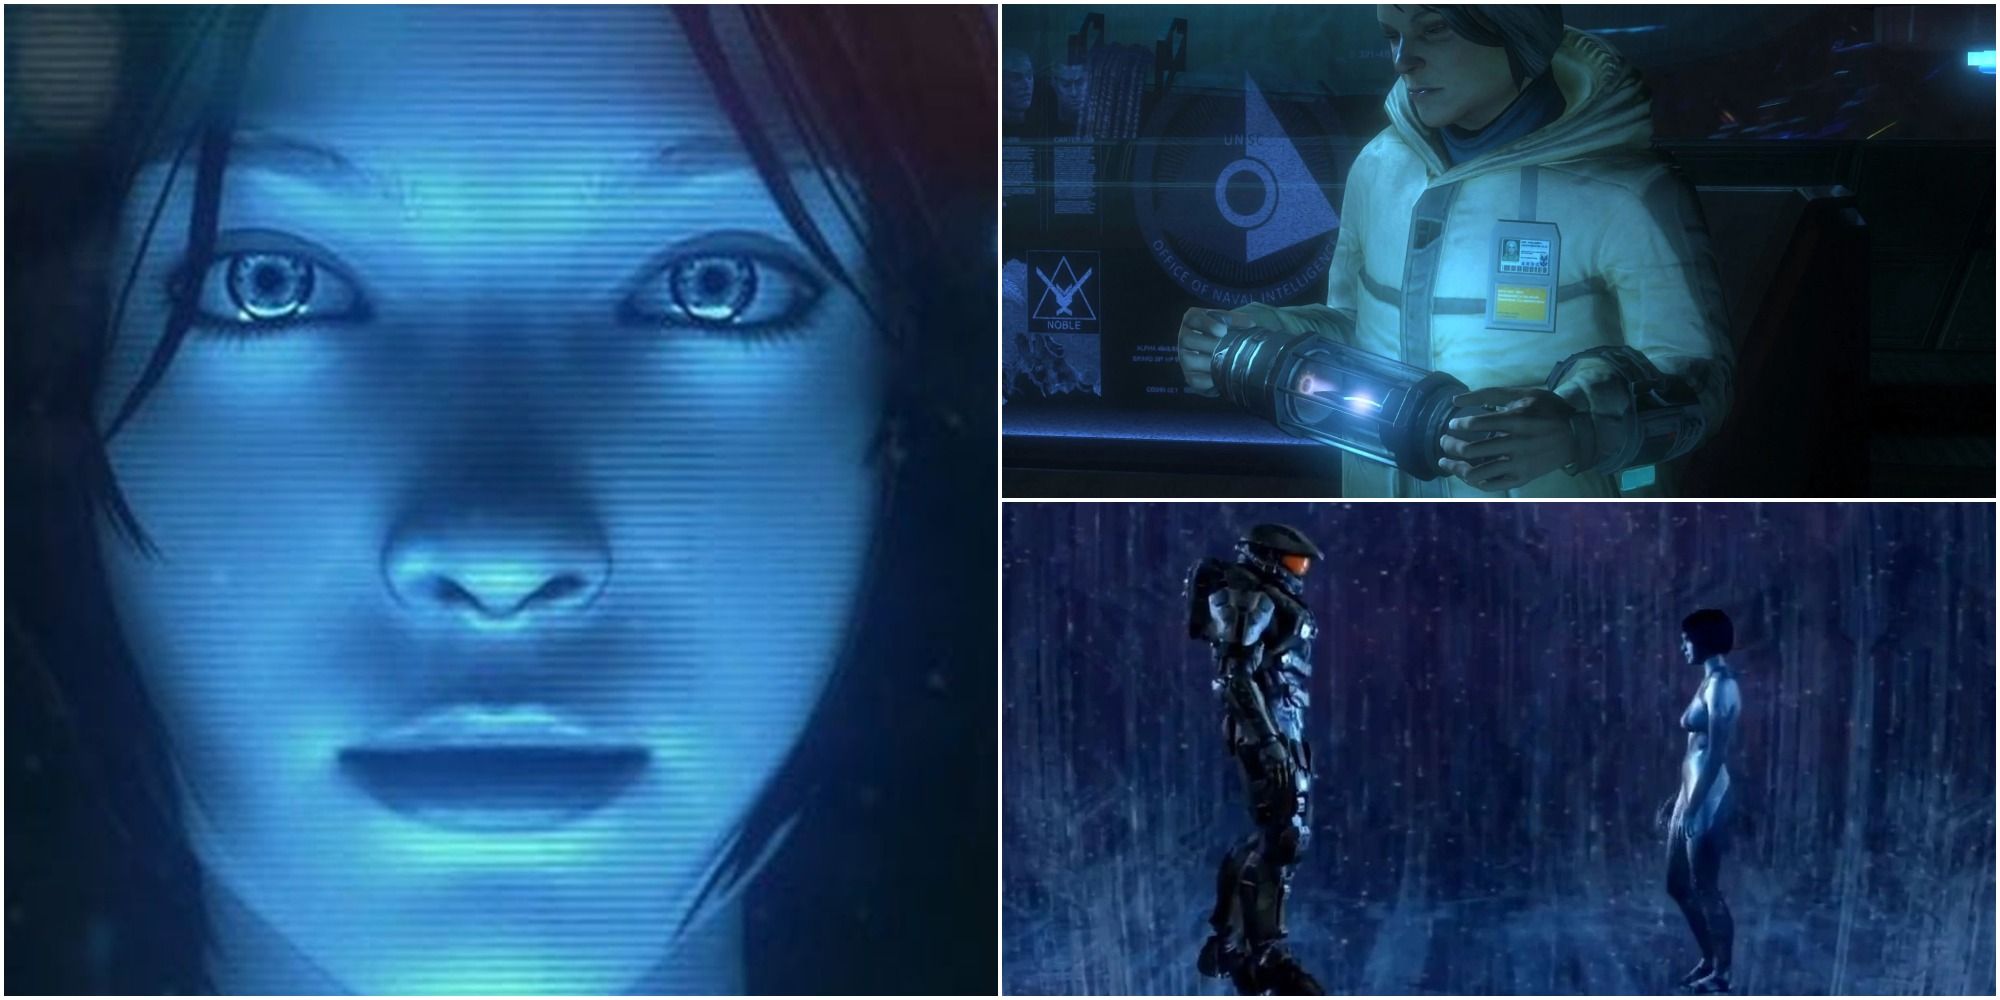 Halo: Cortana's Model In Profile, Dr Catherine Halsey And Cortana With Master Chief In Halo 4